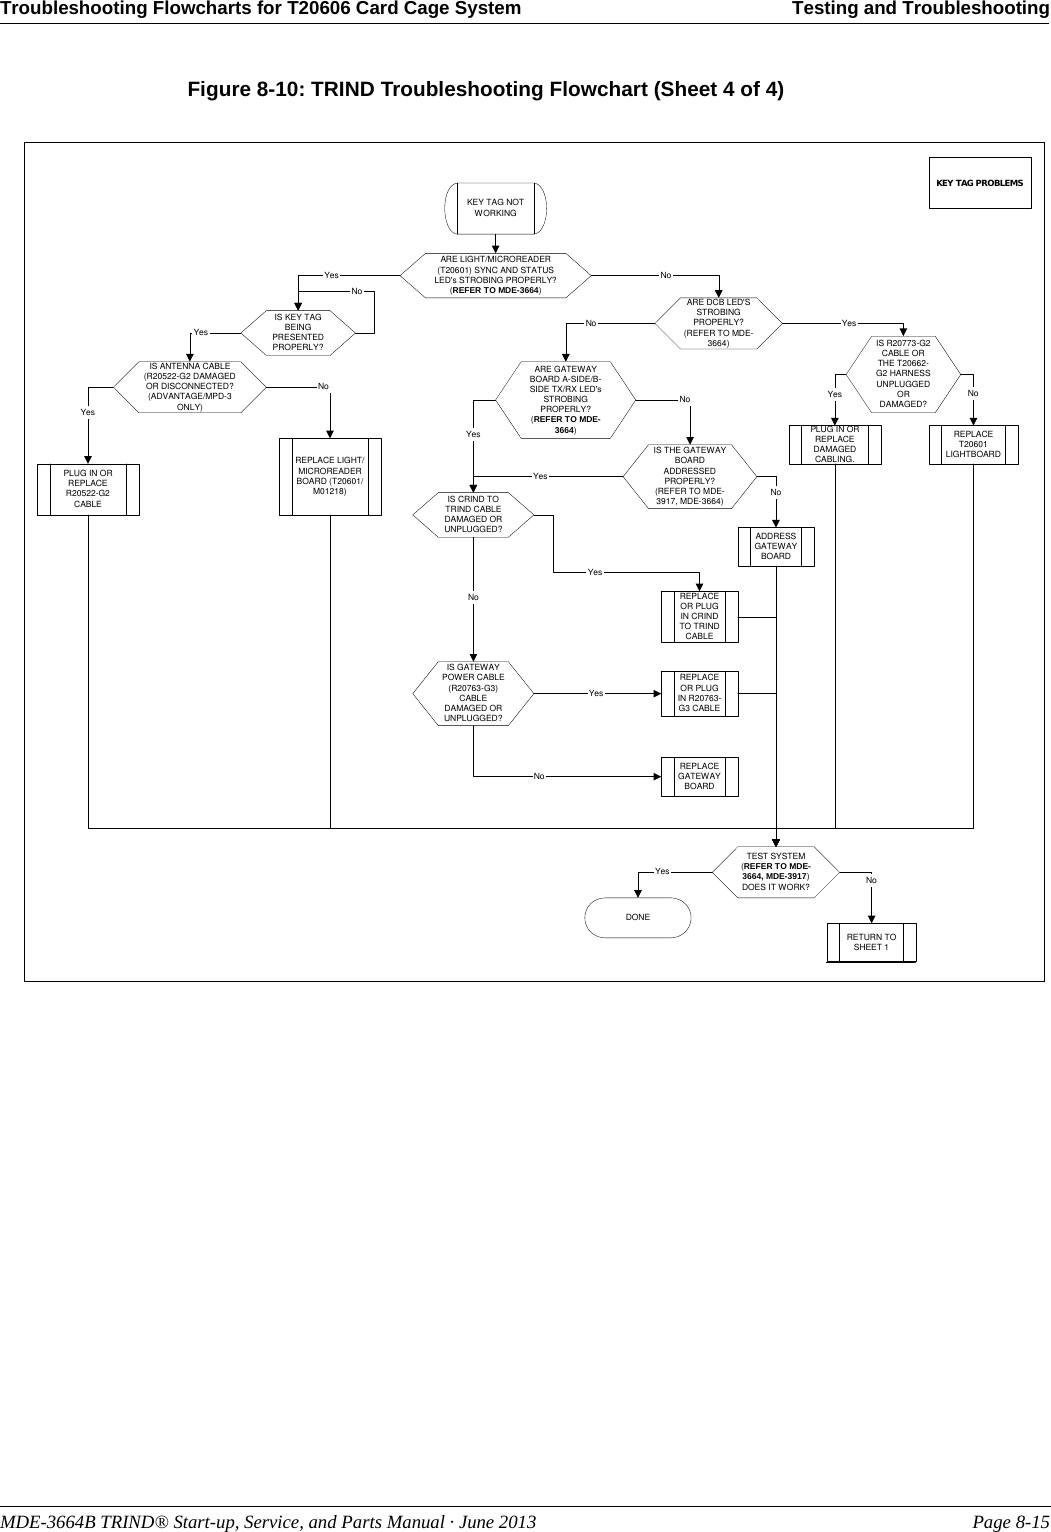 MDE-3664B TRIND® Start-up, Service, and Parts Manual · June 2013 Page 8-15Troubleshooting Flowcharts for T20606 Card Cage System Testing and TroubleshootingFigure 8-10: TRIND Troubleshooting Flowchart (Sheet 4 of 4)KEY TAG PROBLEMSKEY TAG NOTWORKINGARE LIGHT/MICROREADER(T20601) SYNC AND STATUSLED&apos;s STROBING PROPERLY?(REFER TO MDE-3664)Yes NoIS KEY TAGBEINGPRESENTEDPROPERLY?YesNoARE DCB LED&apos;SSTROBINGPROPERLY?(REFER TO MDE-3664)ARE GATEWAYBOARD A-SIDE/B-SIDE TX/RX LED&apos;sSTROBINGPROPERLY?(REFER TO MDE-3664)IS R20773-G2CABLE ORTHE T20662-G2 HARNESSUNPLUGGEDORDAMAGED?Yes NoREPLACET20601LIGHTBOARDPLUG IN ORREPLACEDAMAGEDCABLING.YesNoIS THE GATEWAYBOARDADDRESSEDPROPERLY?(REFER TO MDE-3917, MDE-3664)NoIS CRIND TOTRIND CABLEDAMAGED ORUNPLUGGED? ADDRESSGATEWAYBOARDREPLACEOR PLUGIN CRINDTO TRINDCABLEYesREPLACEOR PLUGIN R20763-G3 CABLENoTEST SYSTEM(REFER TO MDE-3664, MDE-3917)DOES IT WORK?Yes NoDONERETURN TOSHEET 1REPLACEGATEWAYBOARDIS GATEWAYPOWER CABLE(R20763-G3)CABLEDAMAGED ORUNPLUGGED?YesNoNoYesYesIS ANTENNA CABLE(R20522-G2 DAMAGEDOR DISCONNECTED?(ADVANTAGE/MPD-3ONLY)NoYesPLUG IN ORREPLACER20522-G2CABLEREPLACE LIGHT/MICROREADERBOARD (T20601/M01218)